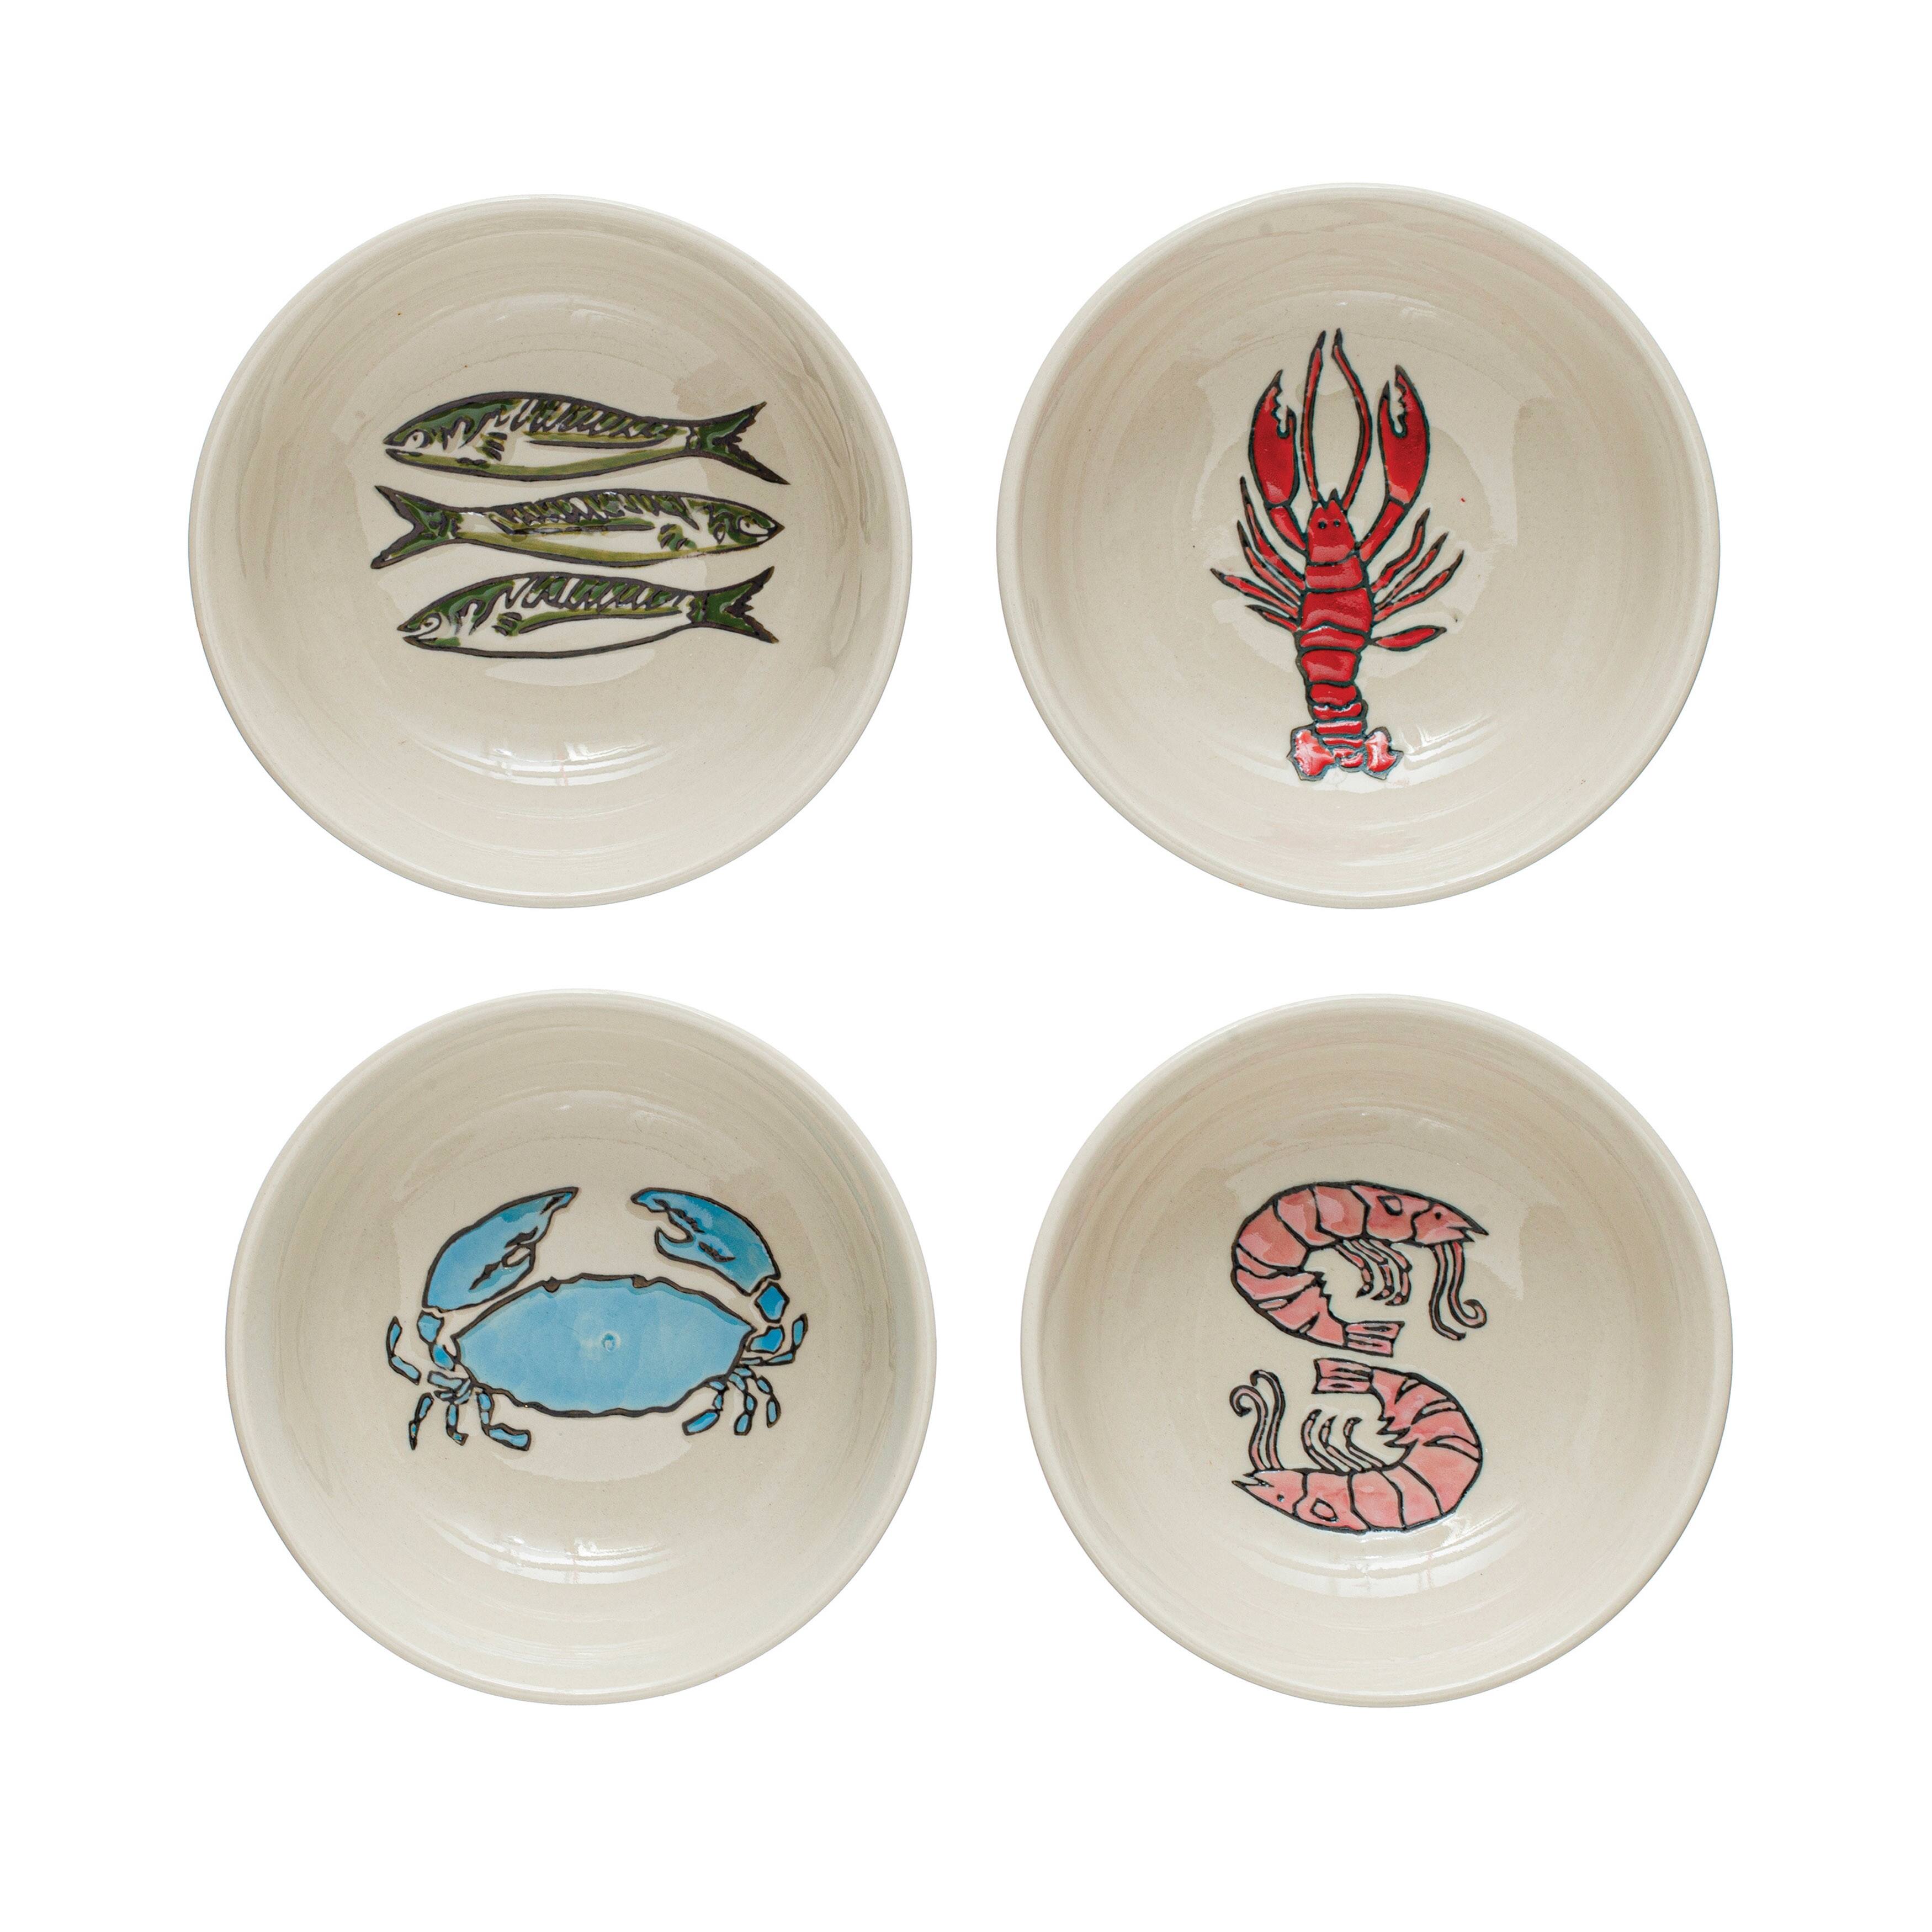 Stoneware Bowls with Wax Relief Sea Life - 4.5"L x 4.5"W x 1.8"H